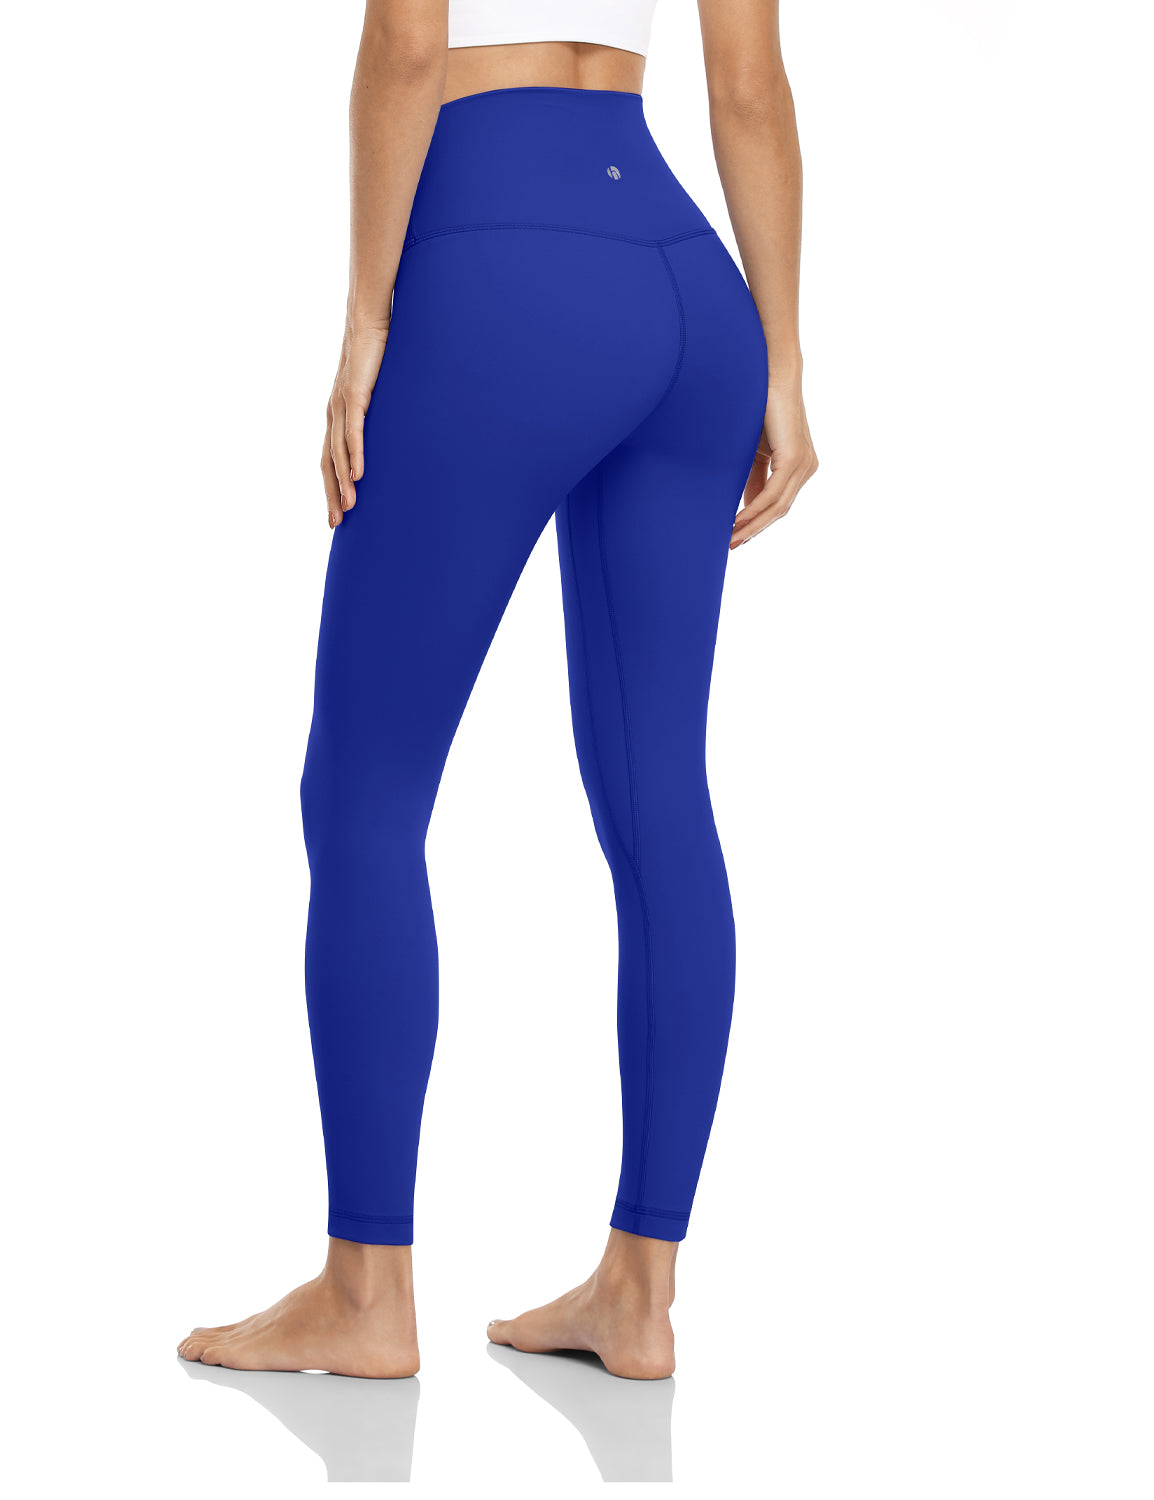 Deals on Heynuts Hawthorn Athletic Essential II High Waisted Yoga Leggings  For Tall Women Buttery Soft Full Length Workout Pants 28 Cassis M 8 10, Compare Prices & Shop Online